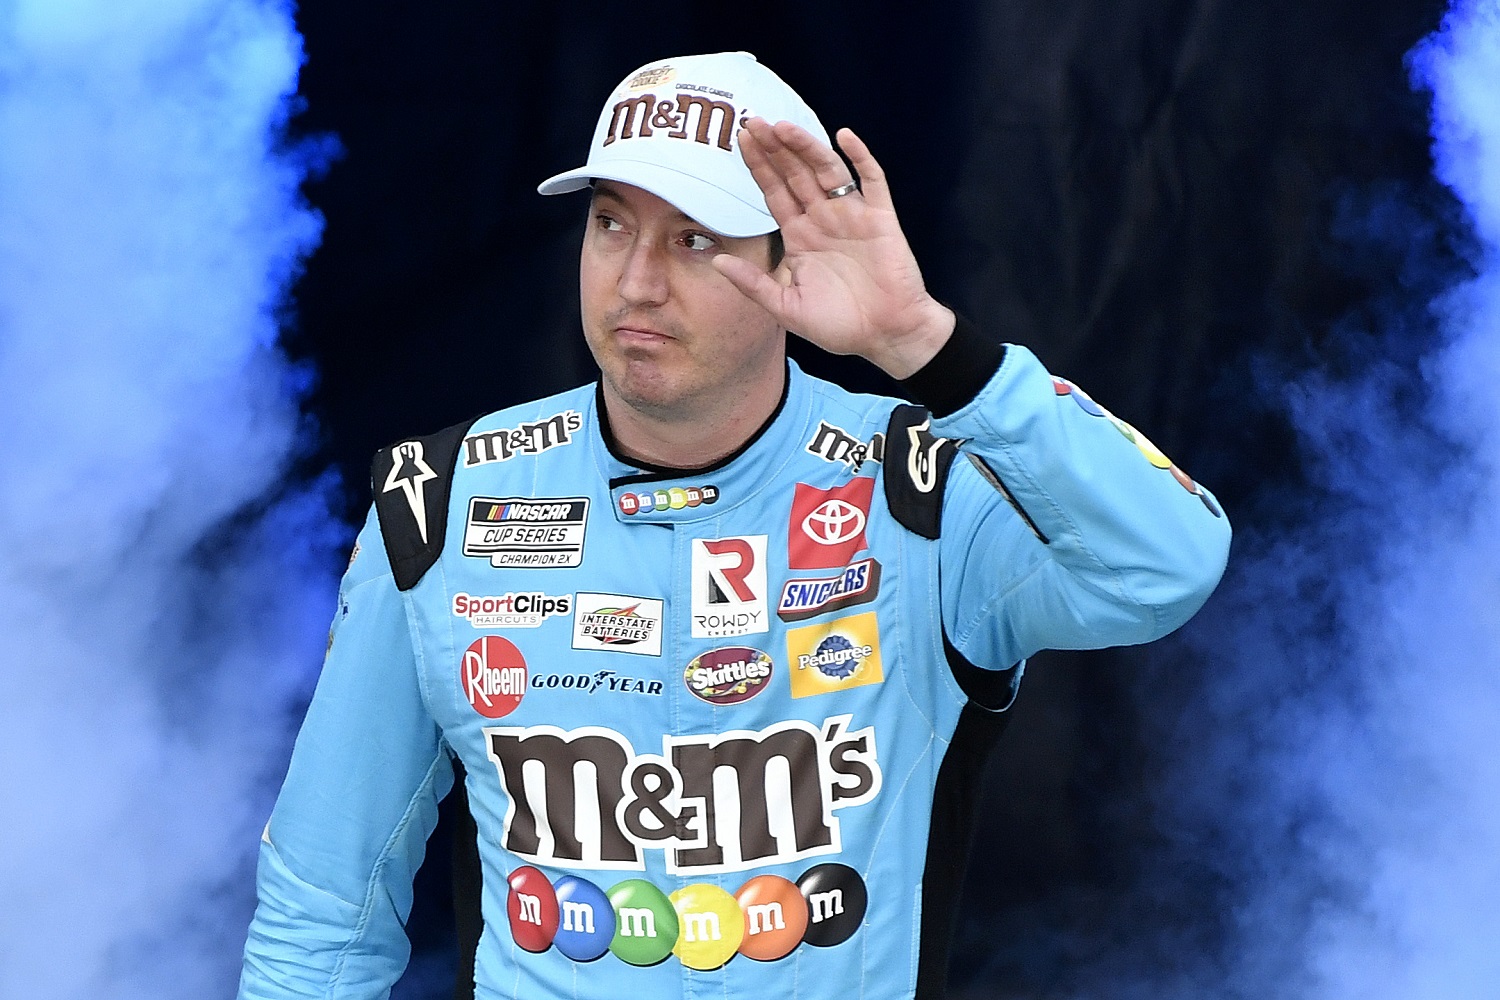 Kyle Busch waves to fans during driver intros prior to the NASCAR Cup Series Food City Dirt Race at Bristol Motor Speedway on April 17, 2022. | Logan Riely/Getty Images